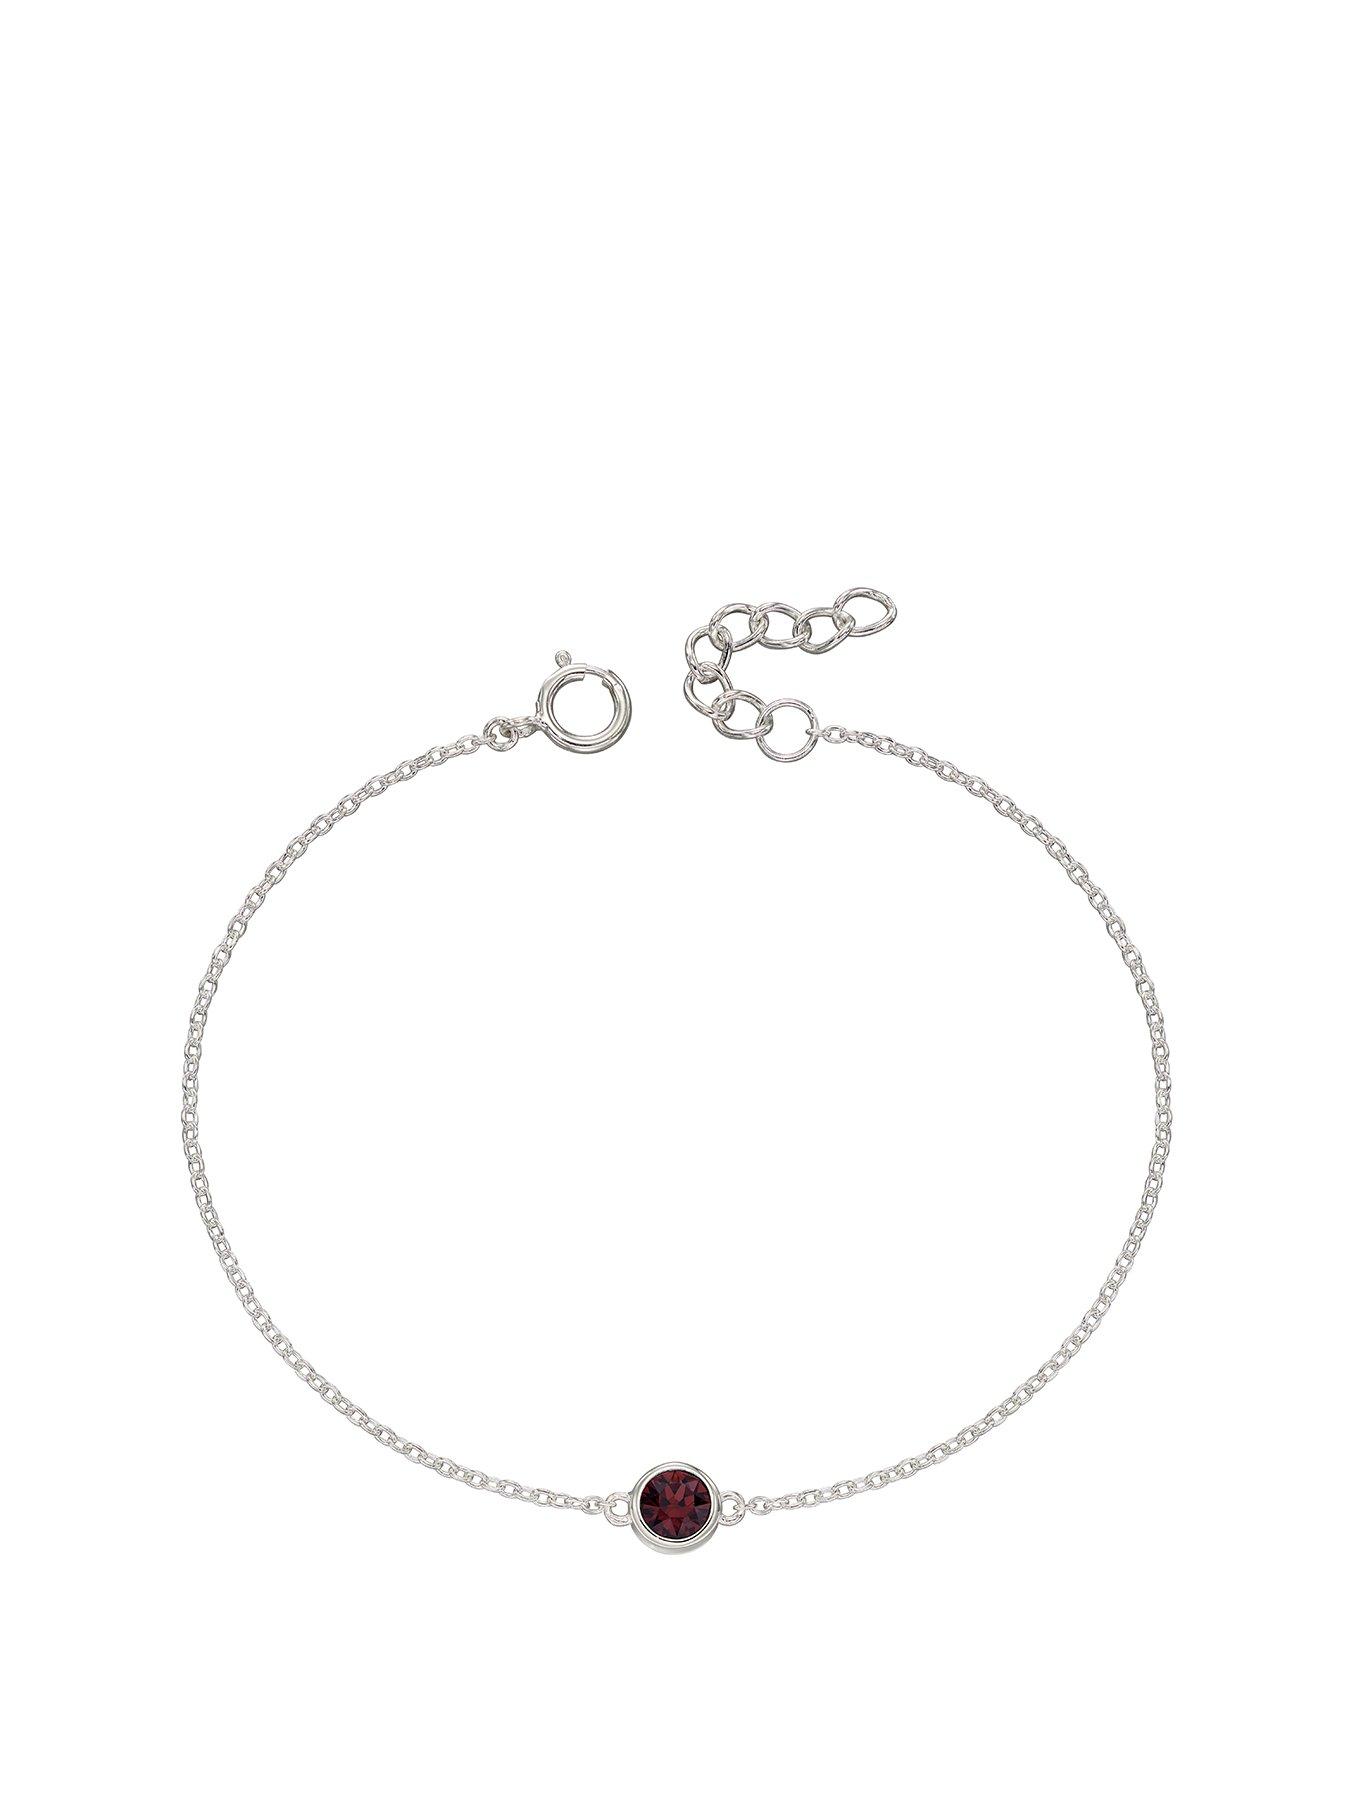 The Love Silver Collection Sterling Silver Birthstone Bracelet ...